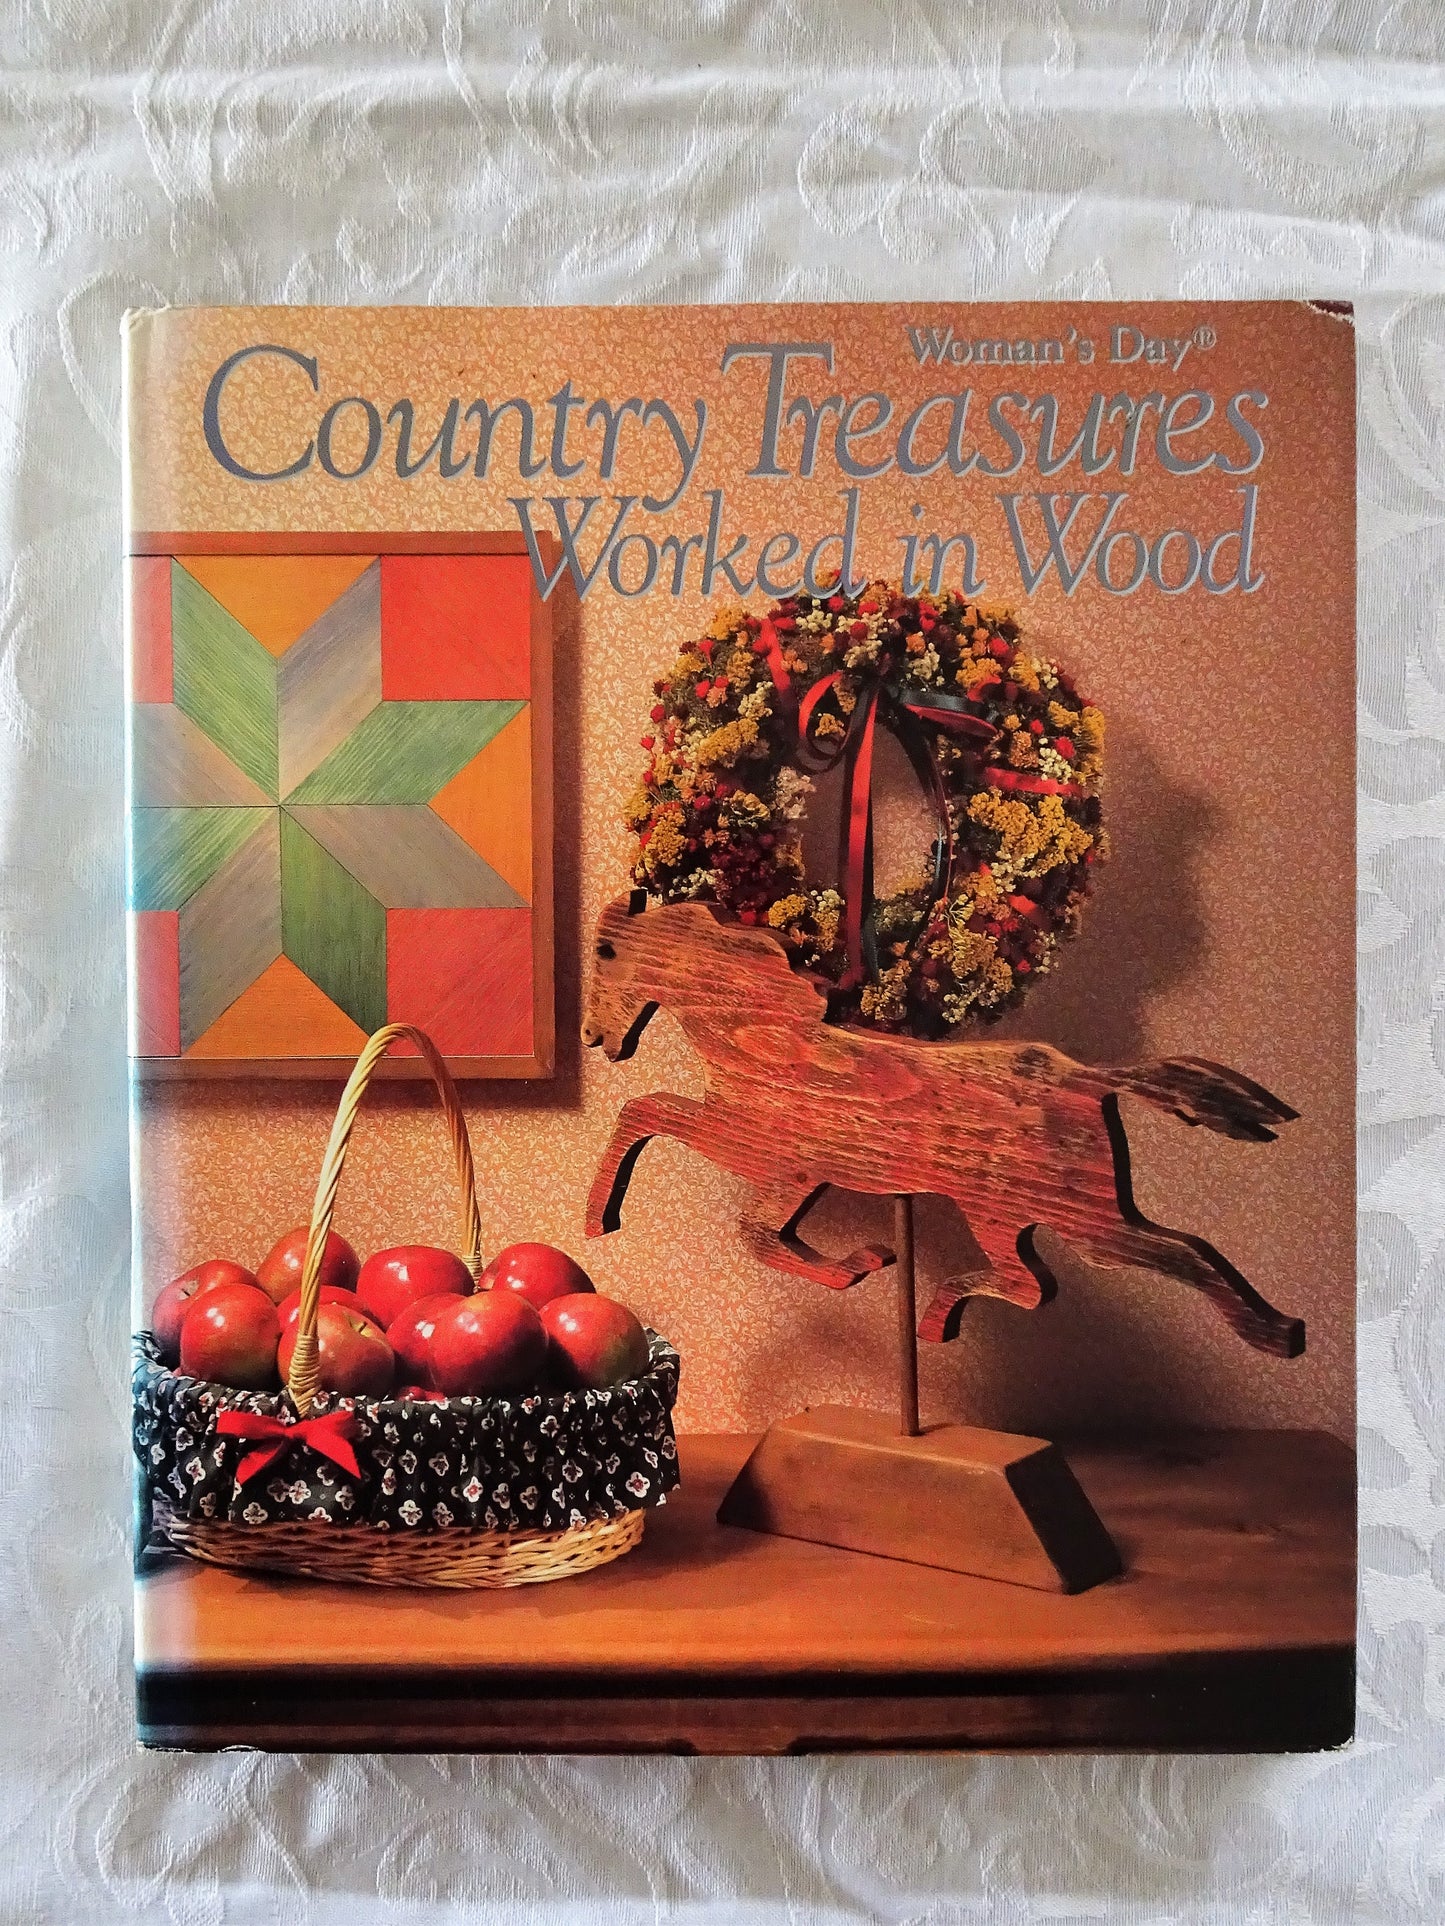 Country Treasures Worked In Wood by Woman's Day